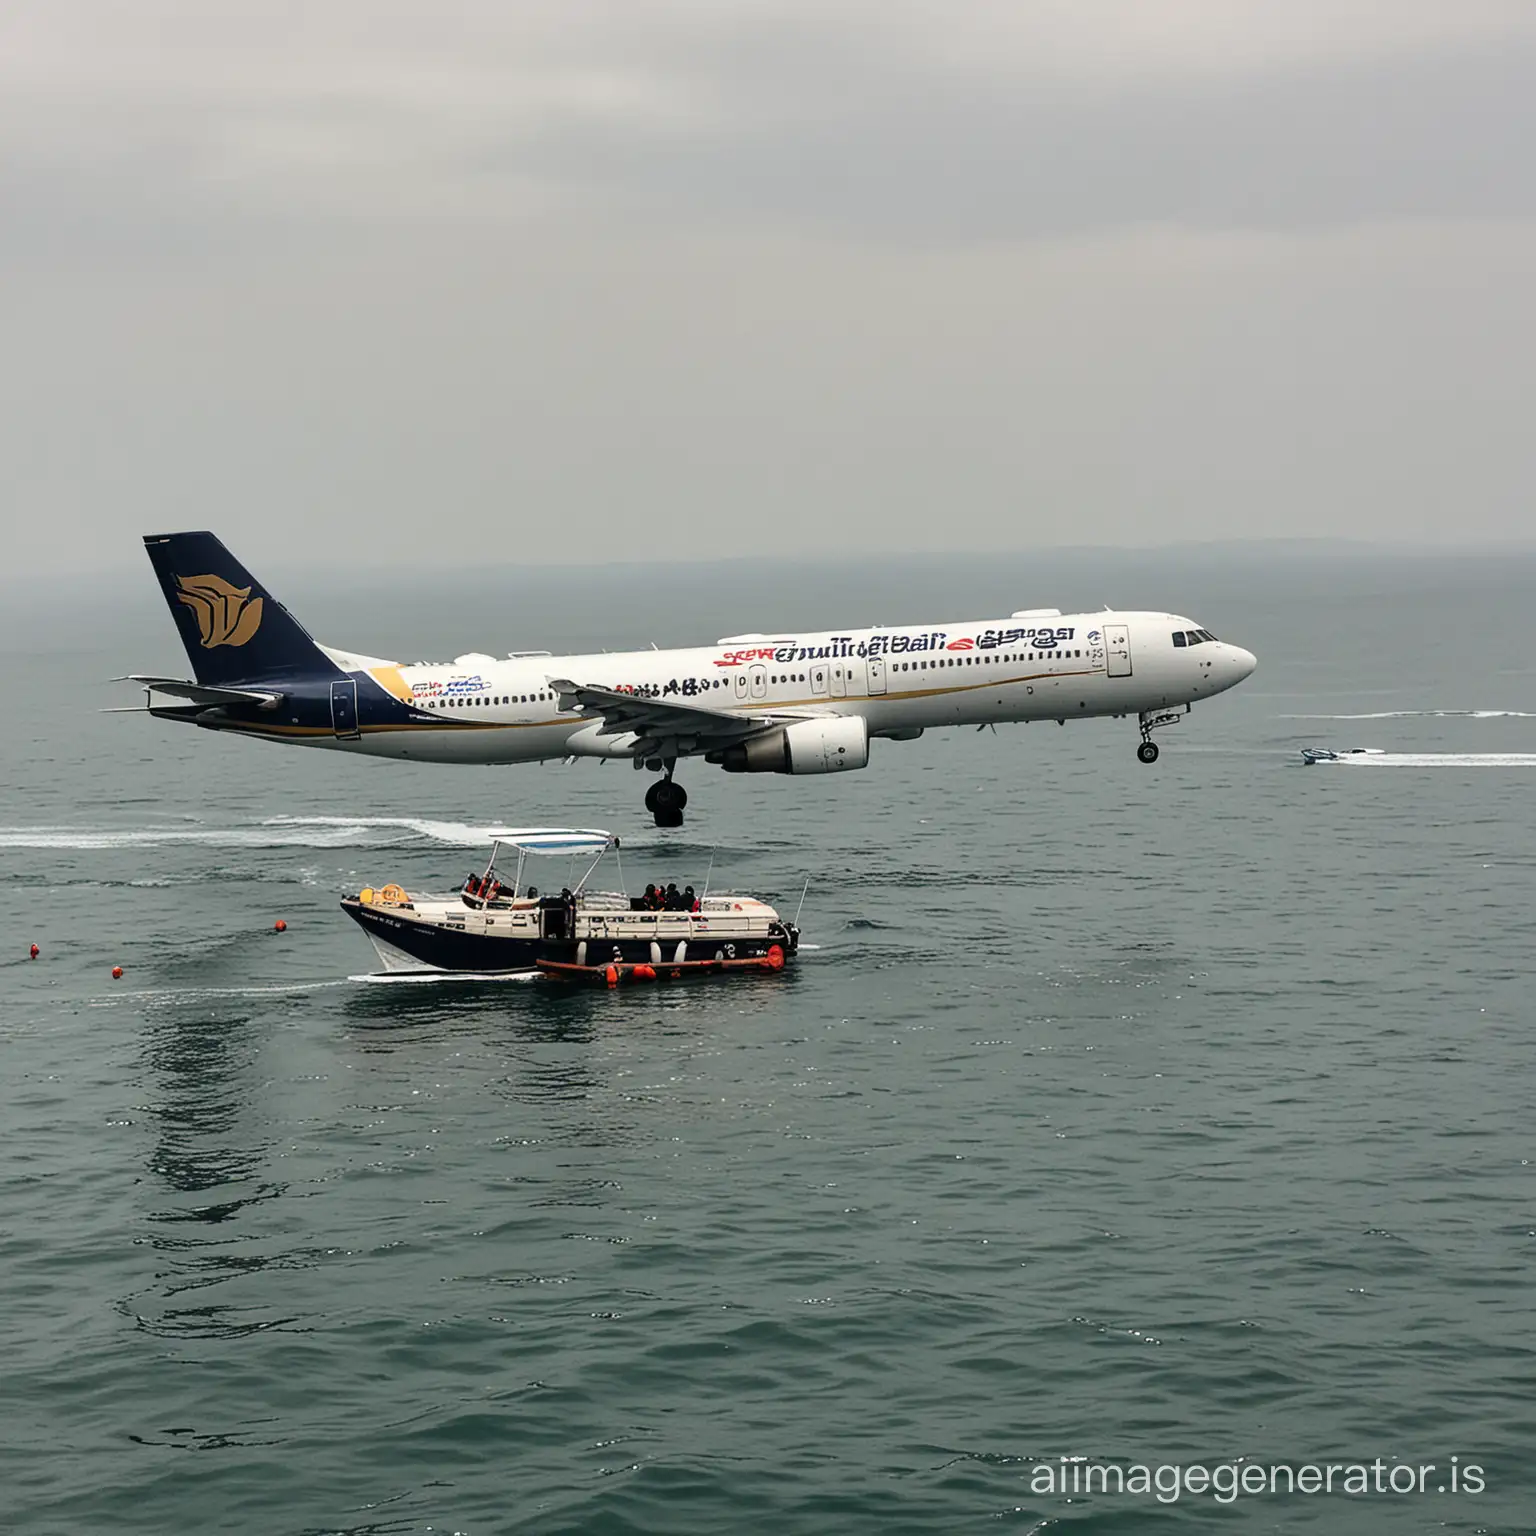 Tunisair-Airplane-on-Boat-A-Dramatic-Scene-of-Illegal-Immigration-by-Sea